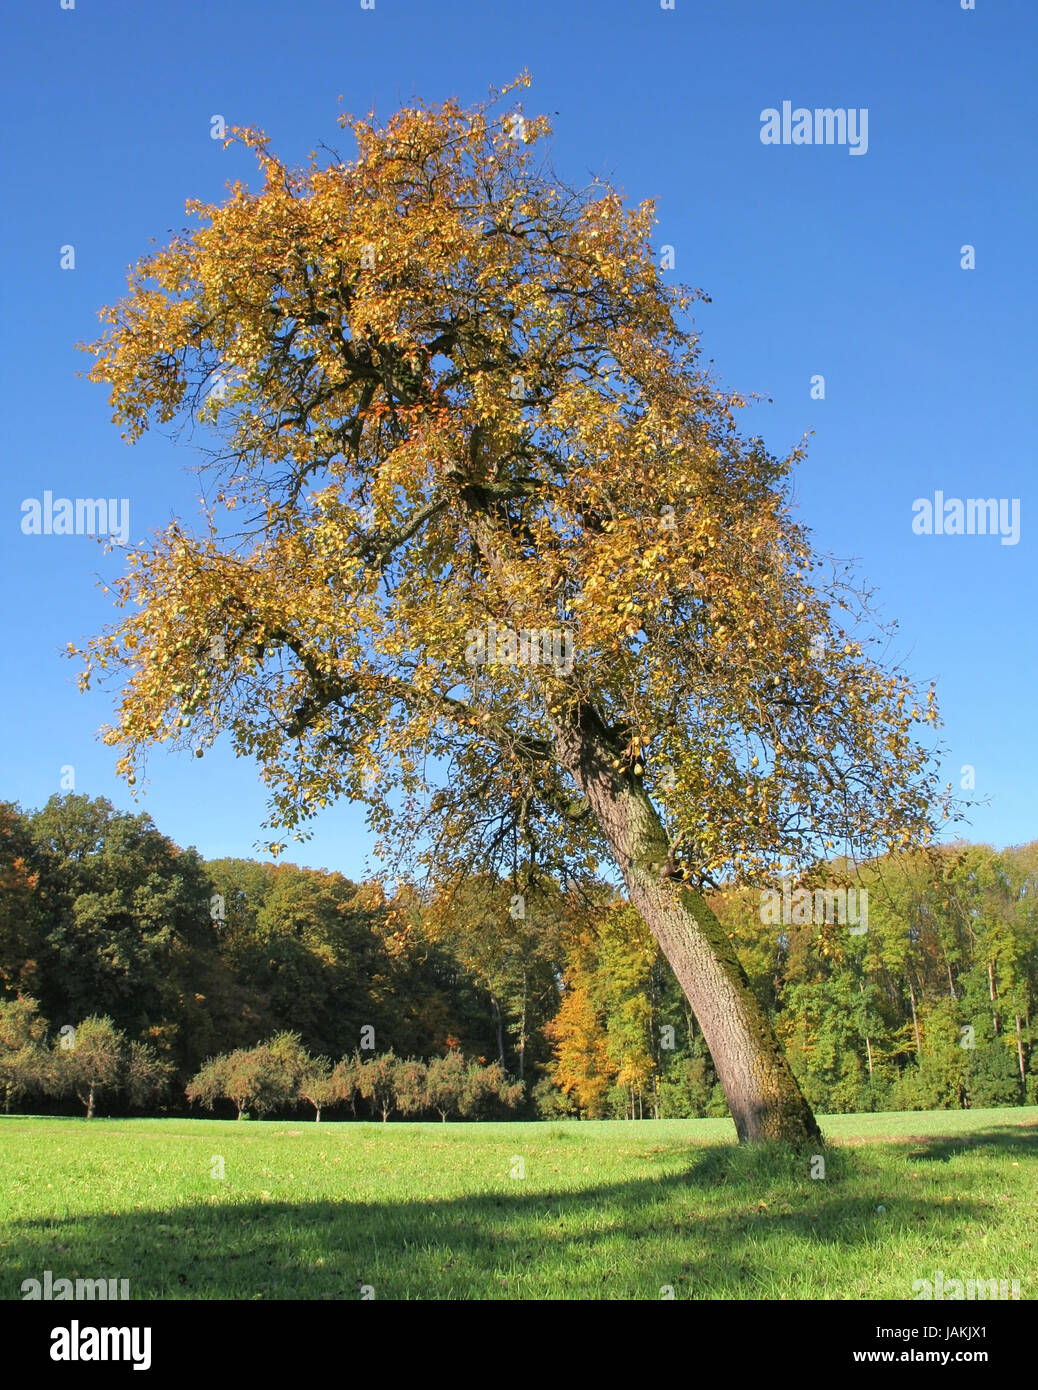 autumn scenery in Southern Germany including a incline tree Stock Photo